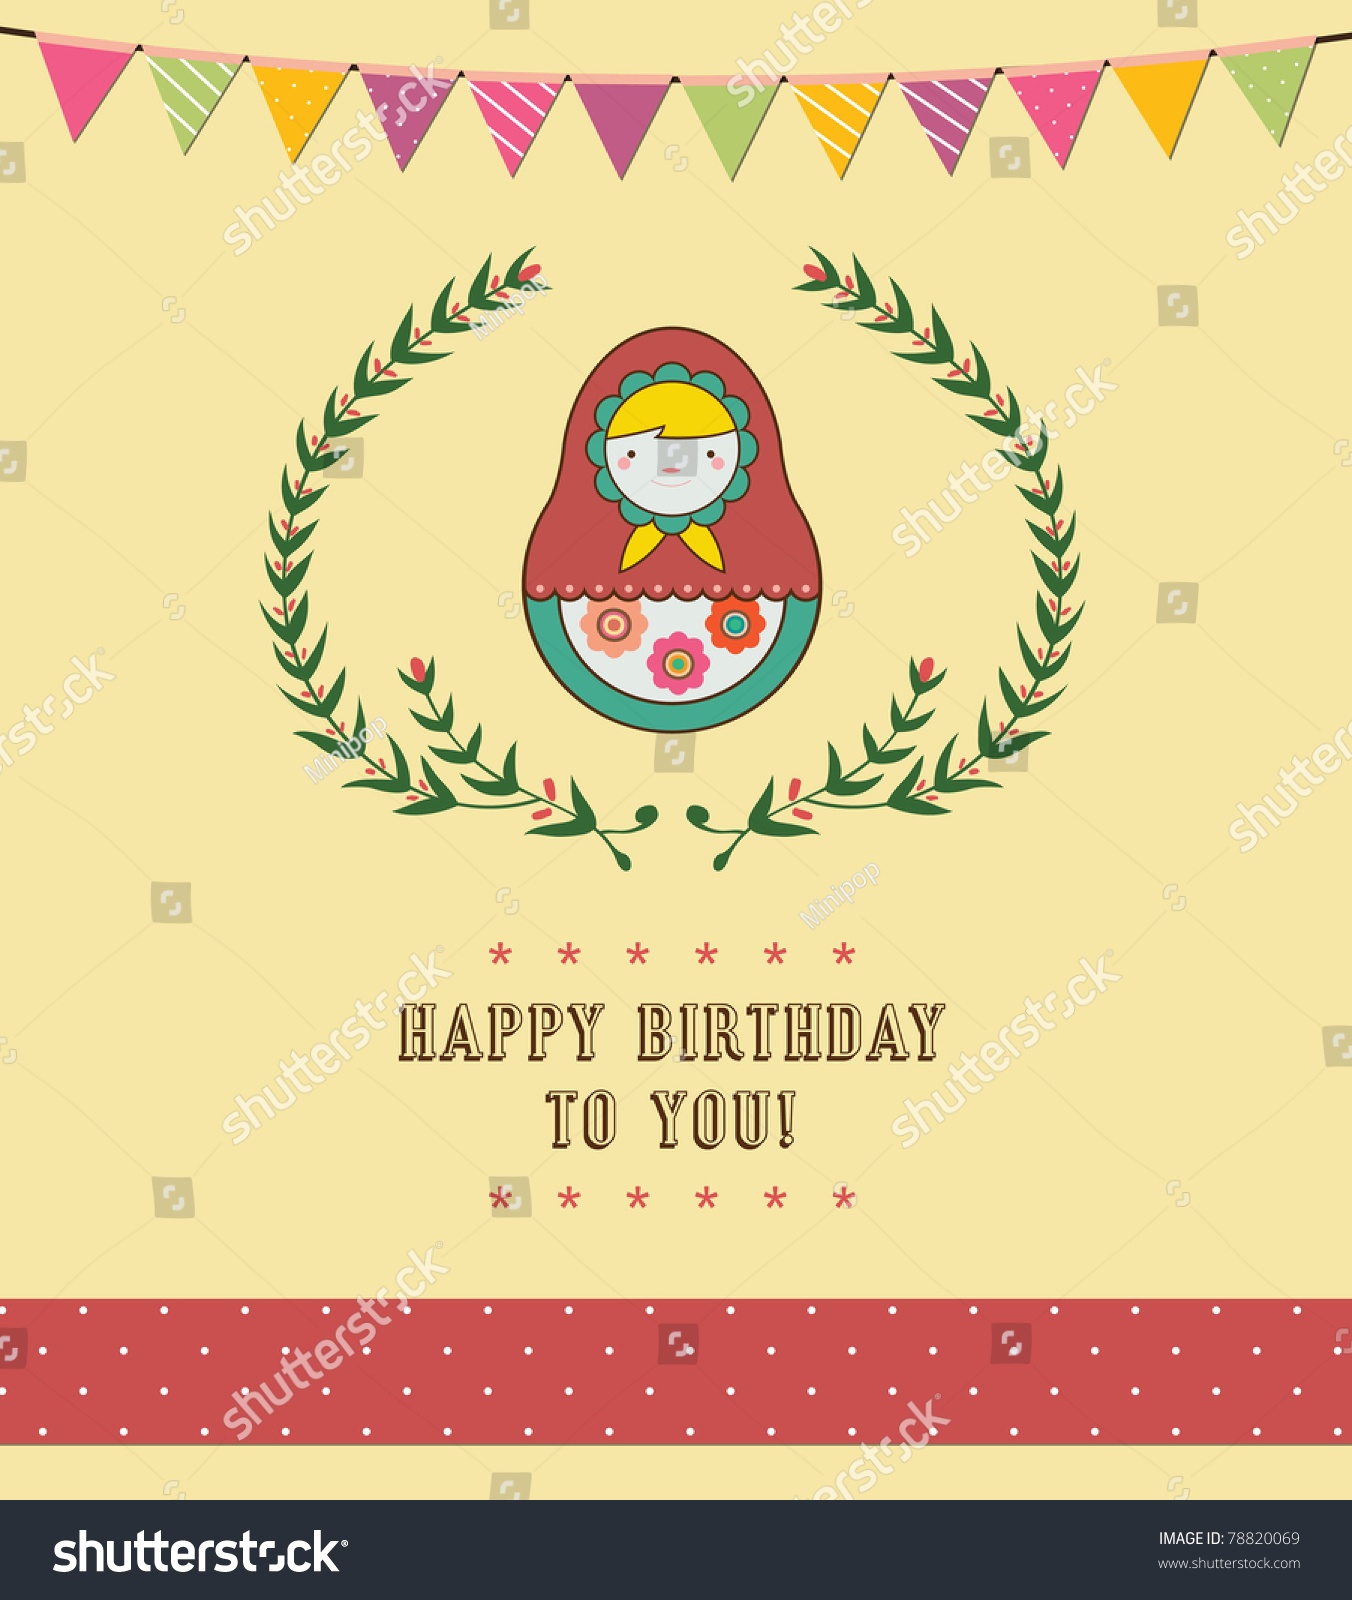 96+ Funny Russian Birthday Cards - Love Cards Funny Card Greeting - Free Printable Russian Birthday Cards